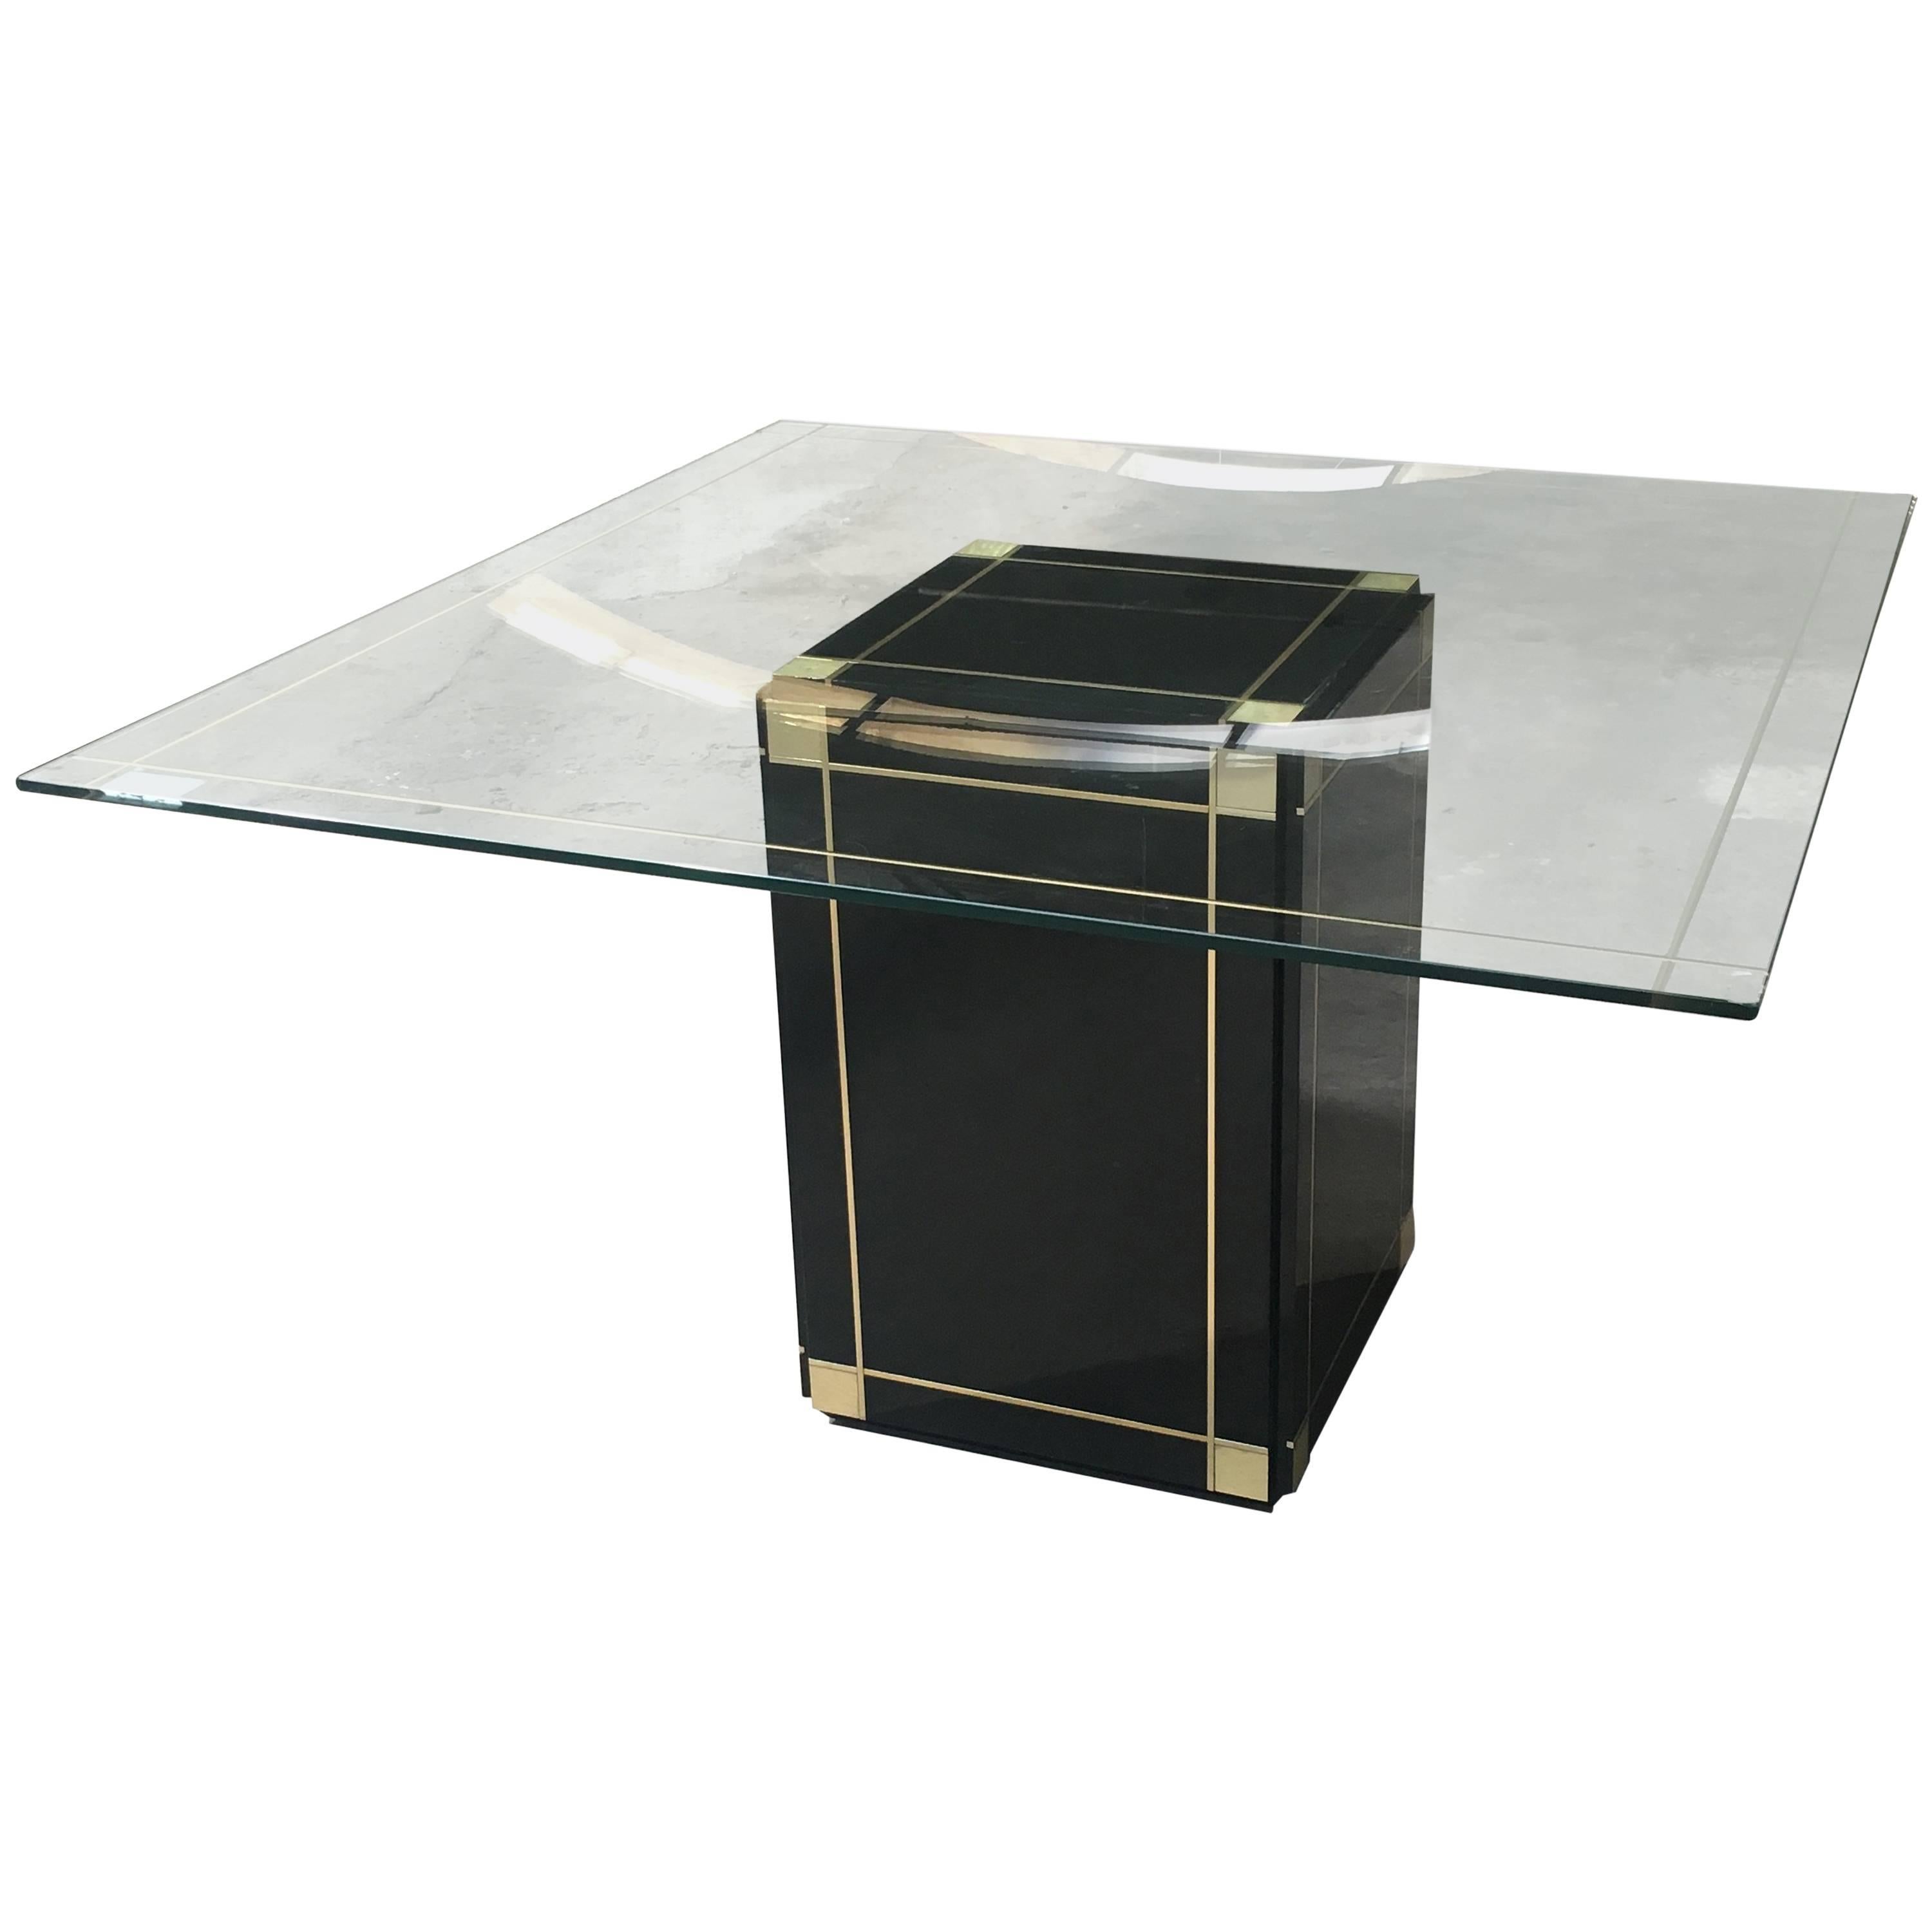 Italian Willy Rizzo Dining Table with Glass Top and Black Lacquered Base